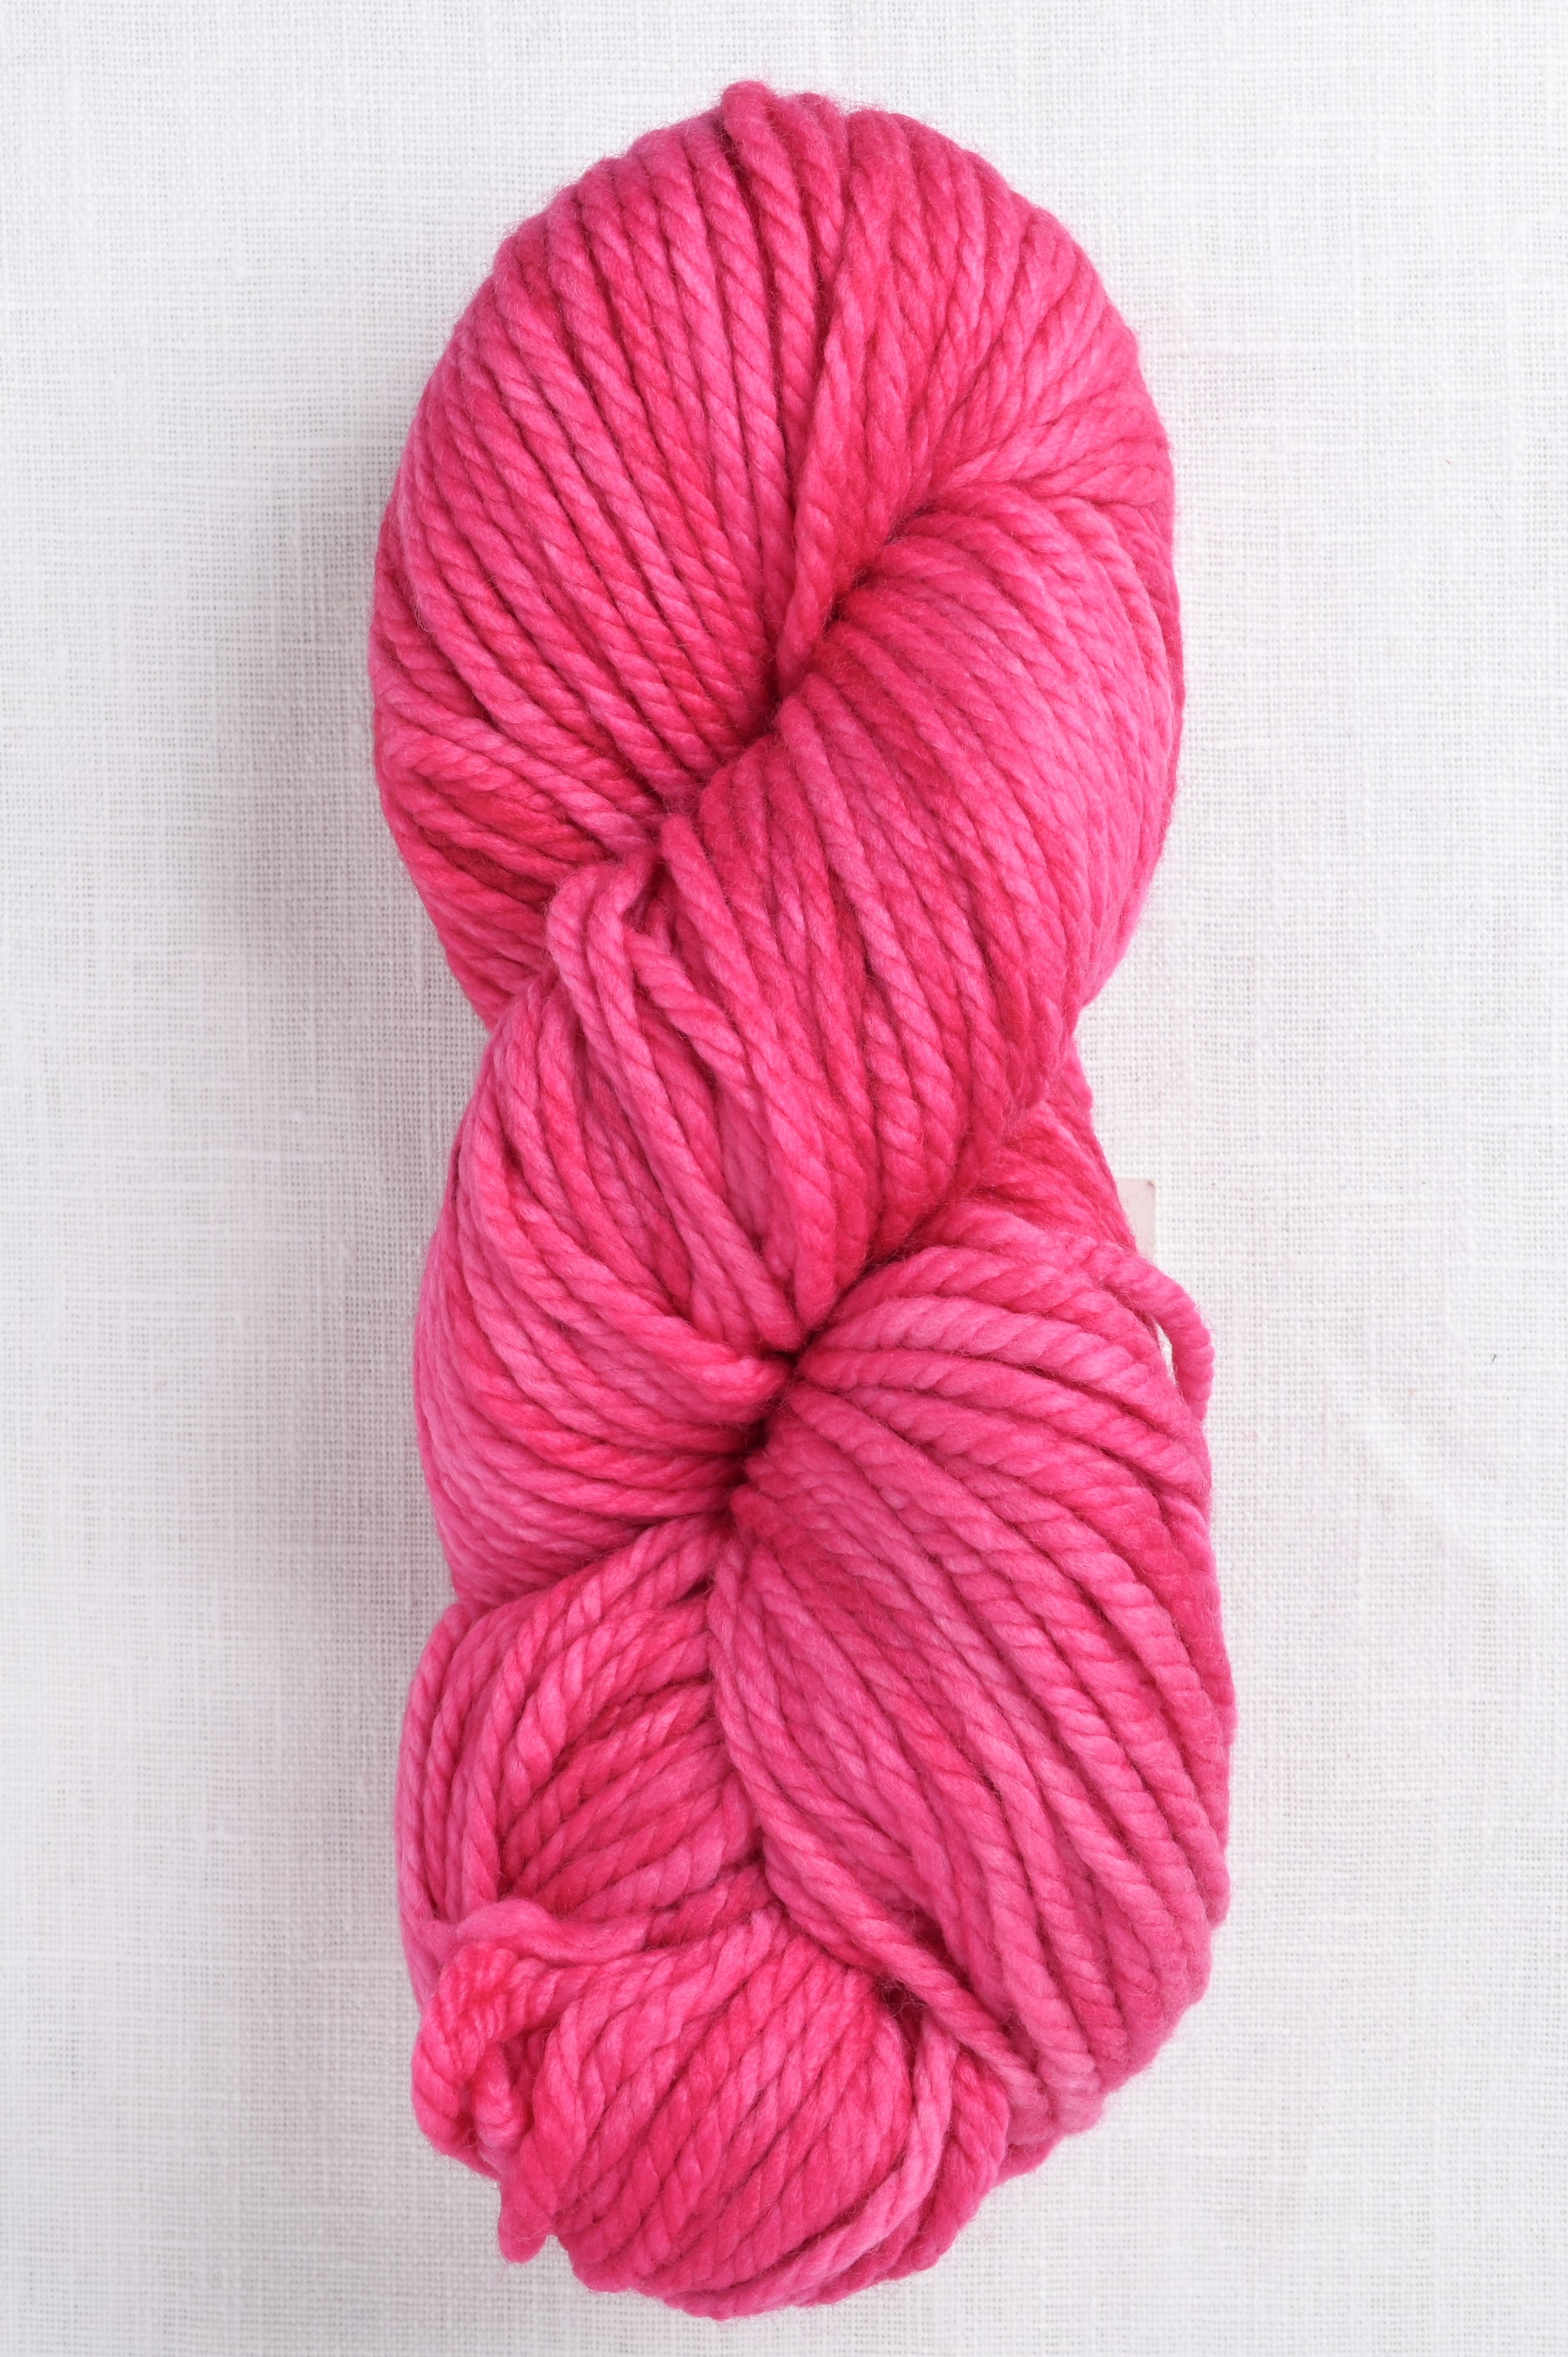 Malabrigo Lace in color Shocking Pink, Lace Weight Merino Wool Knitting Yarn,  pink, #184 Red Beauty Textiles